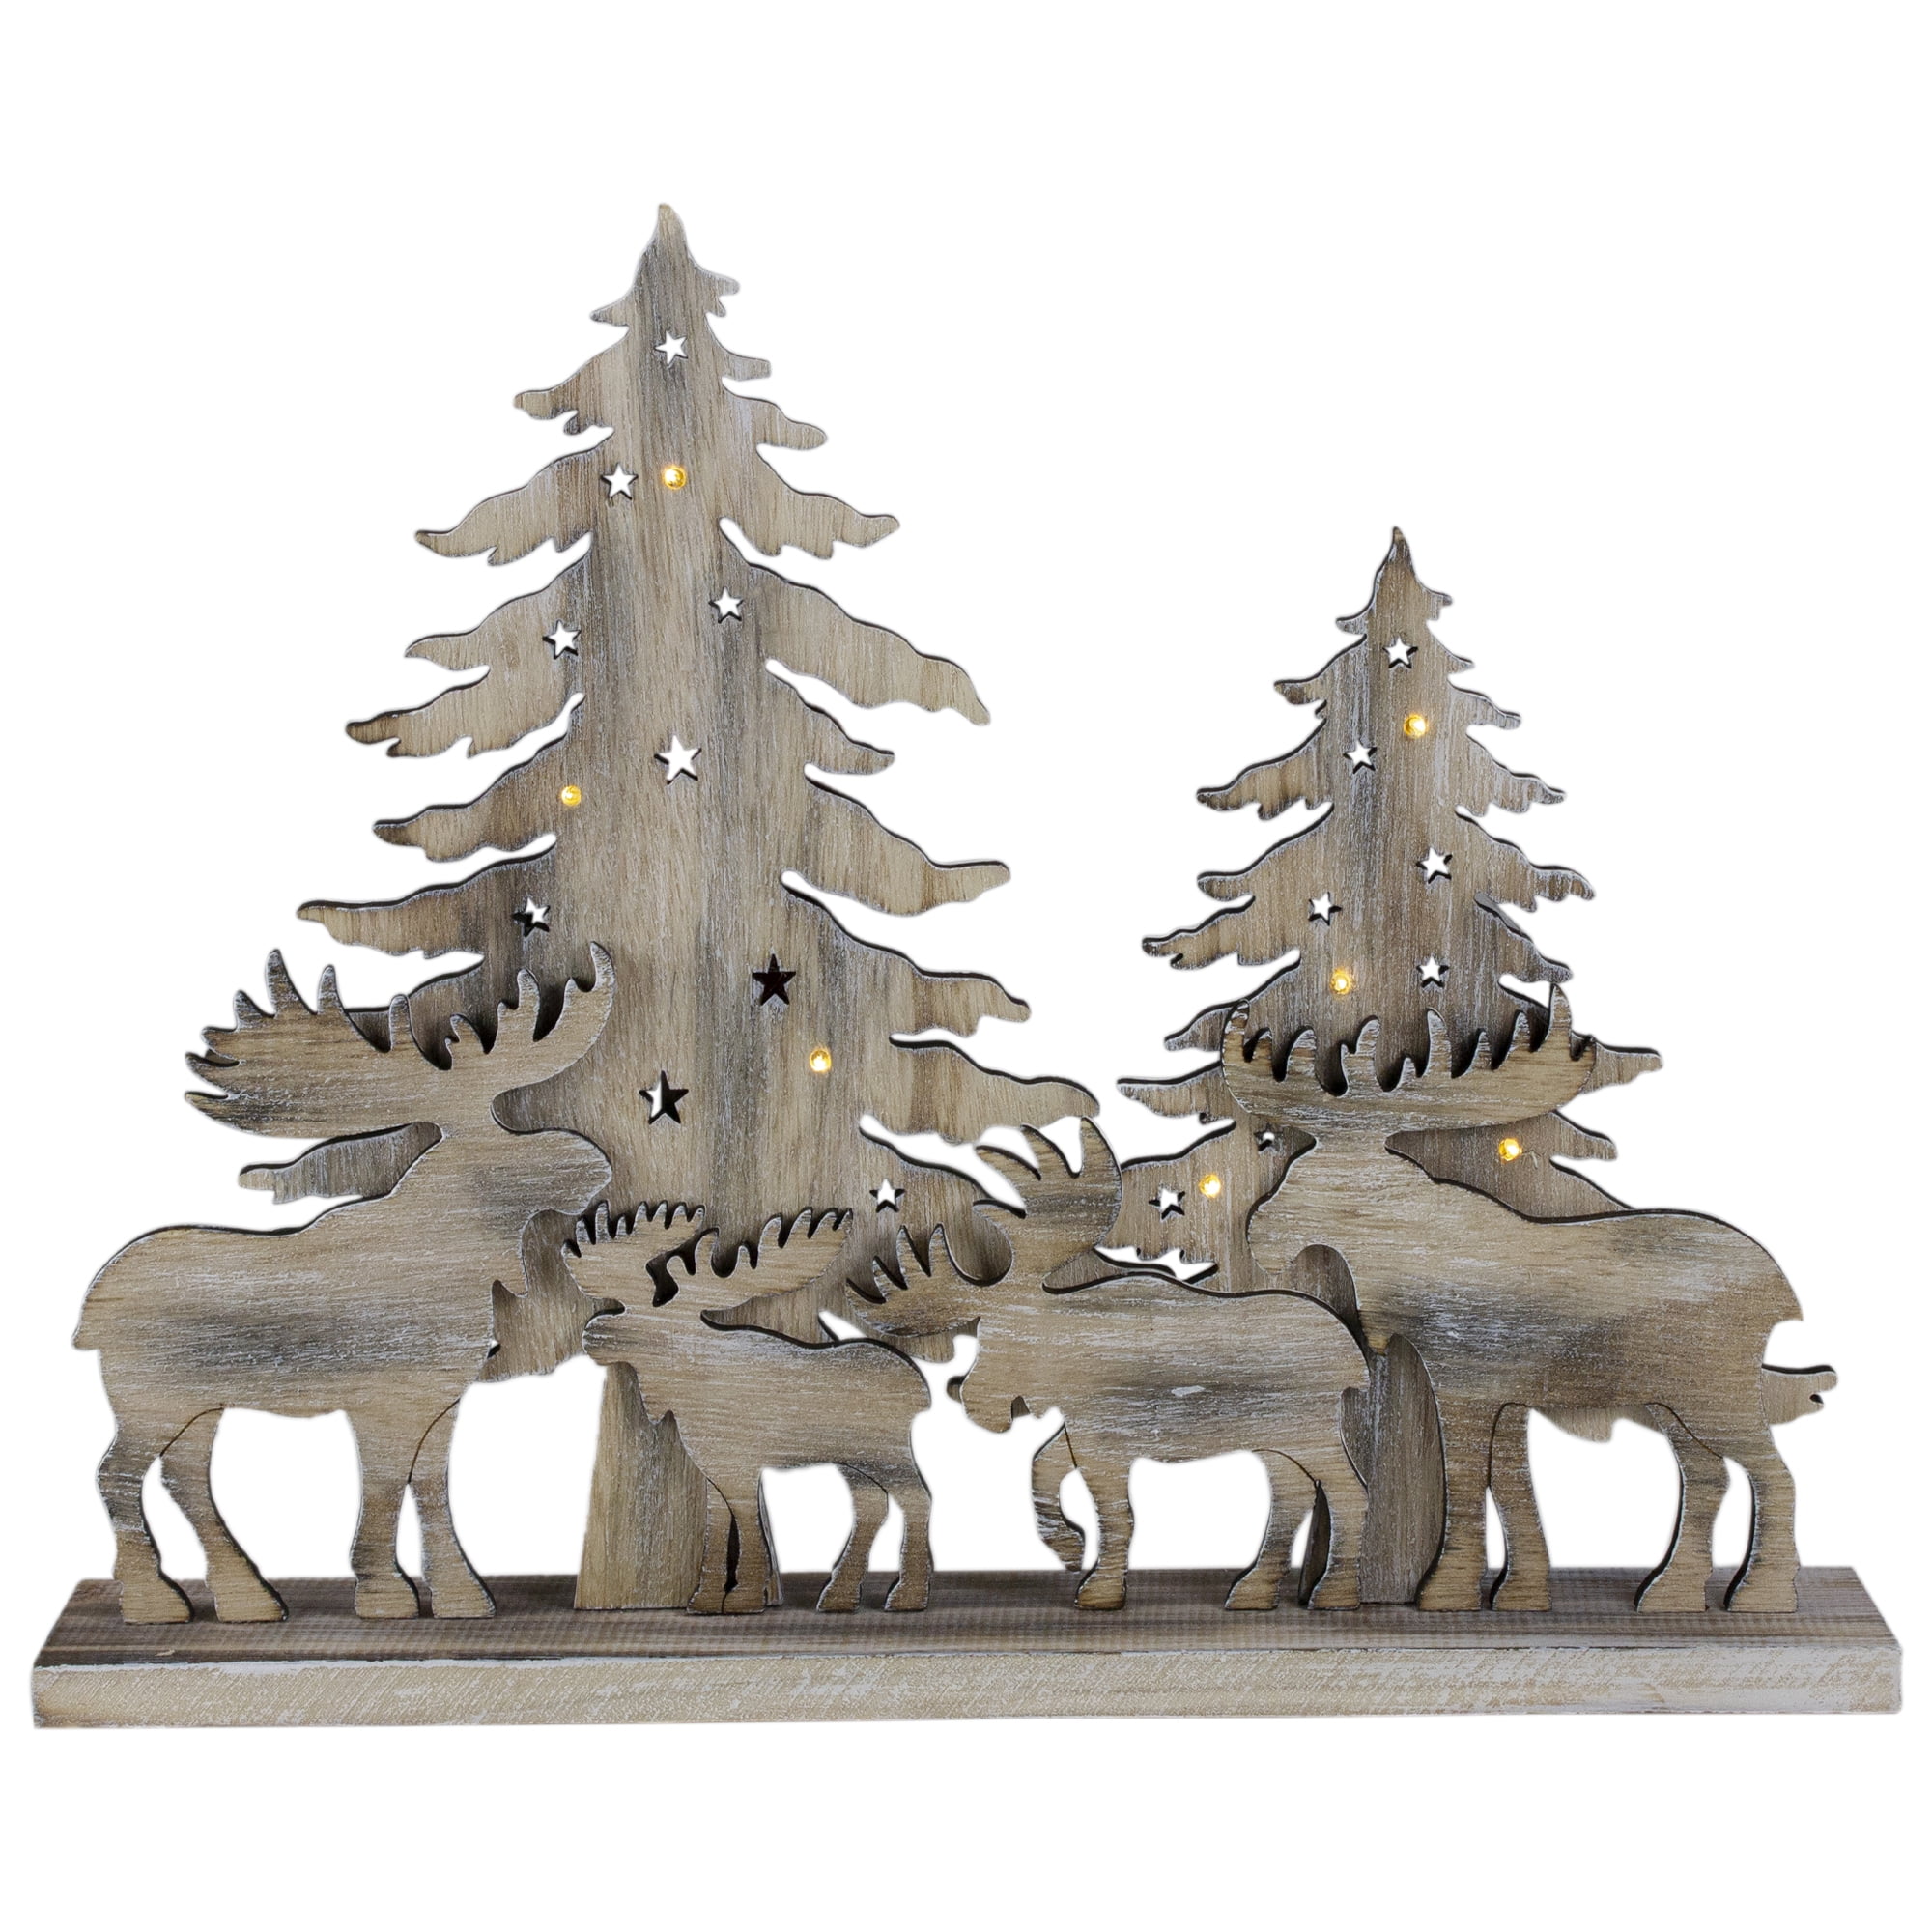 Christmas tree miniature in pot with moose